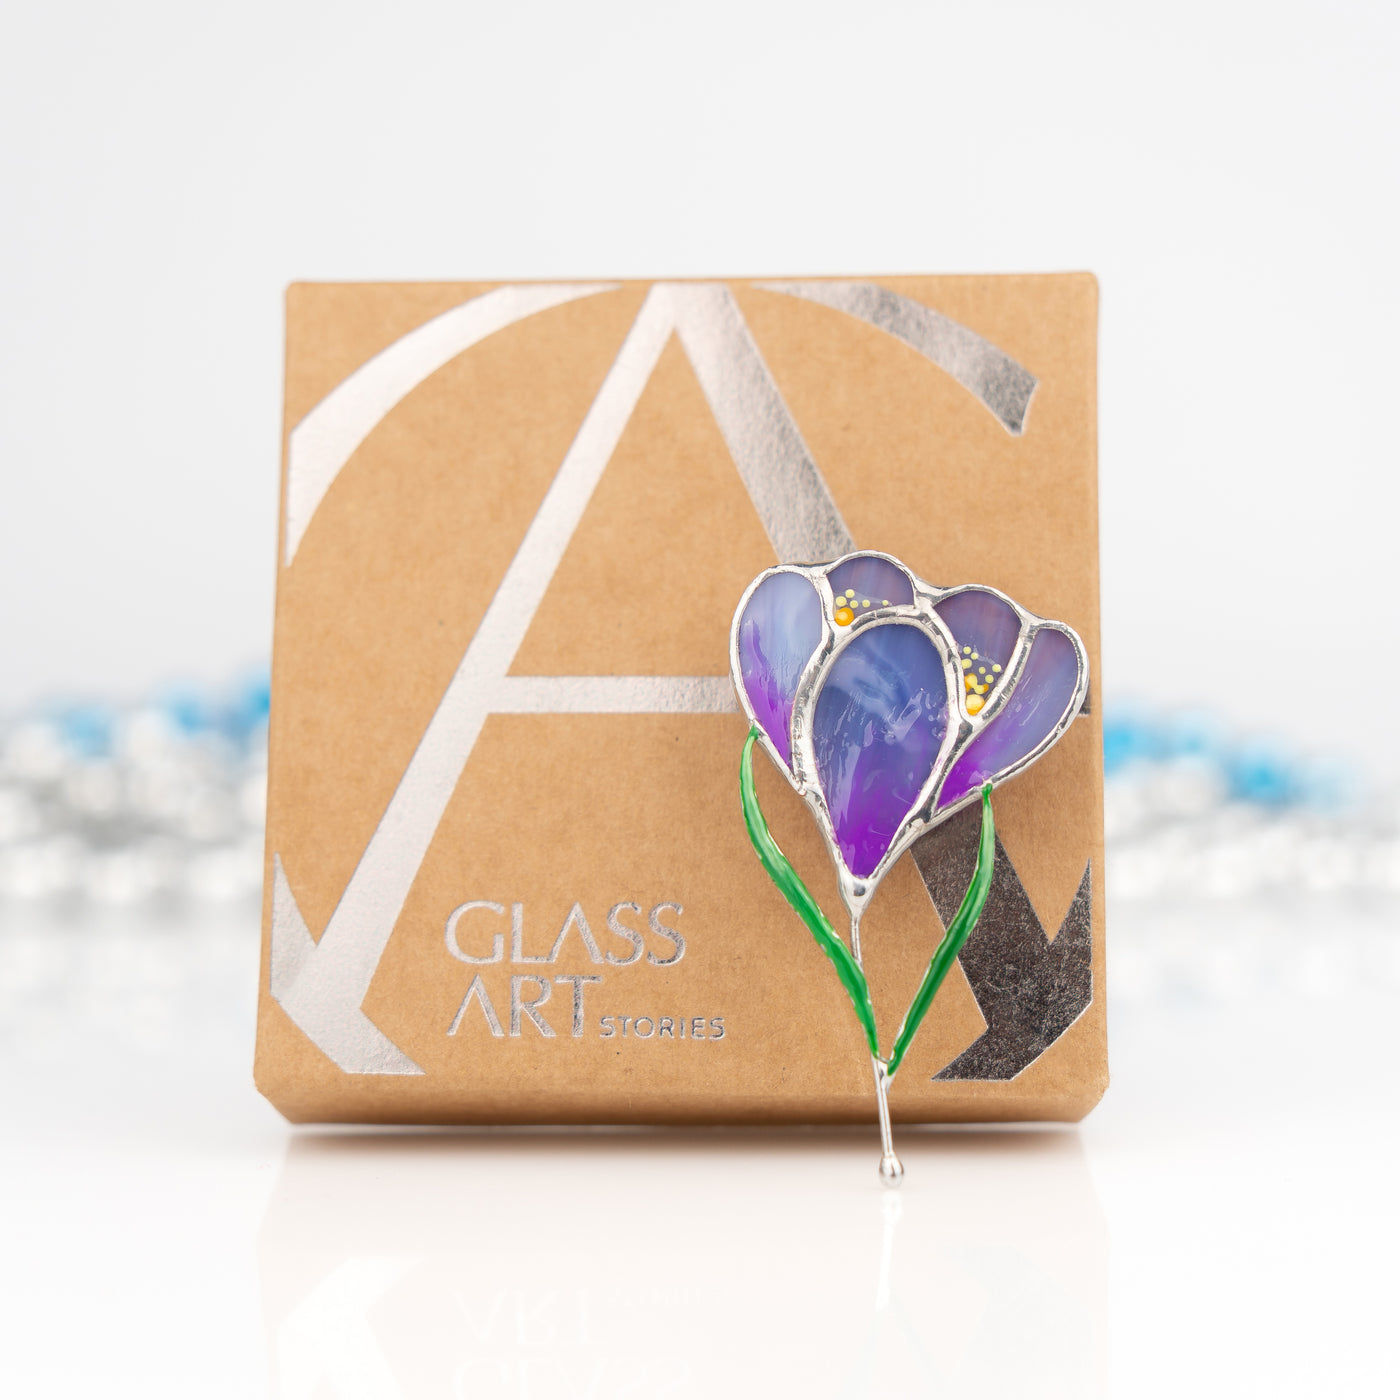 Crocus flower brooch of stained glass and a brand box